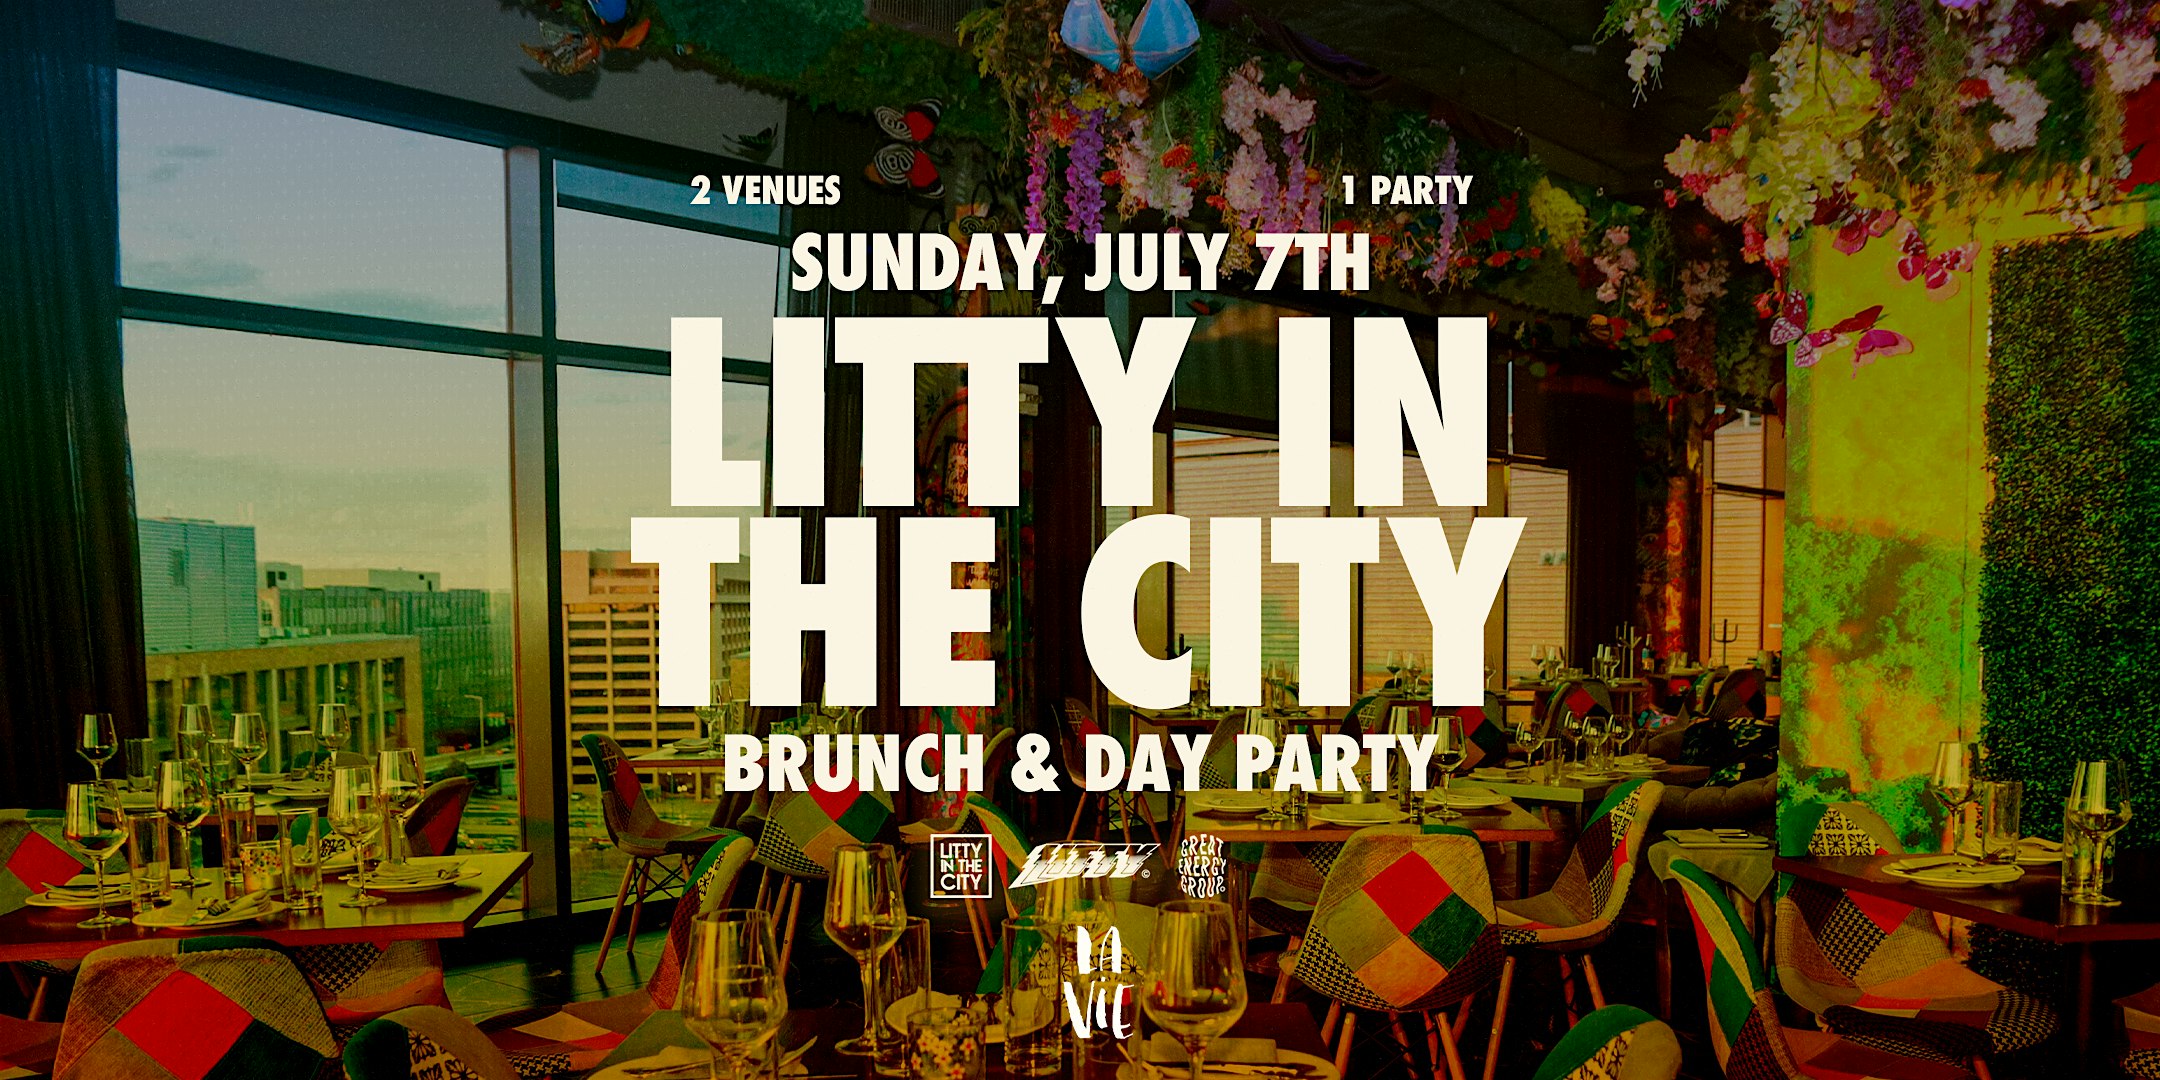 Litty in the City Brunch & Day Party at La Vie Penthouse |Sun. July 7th